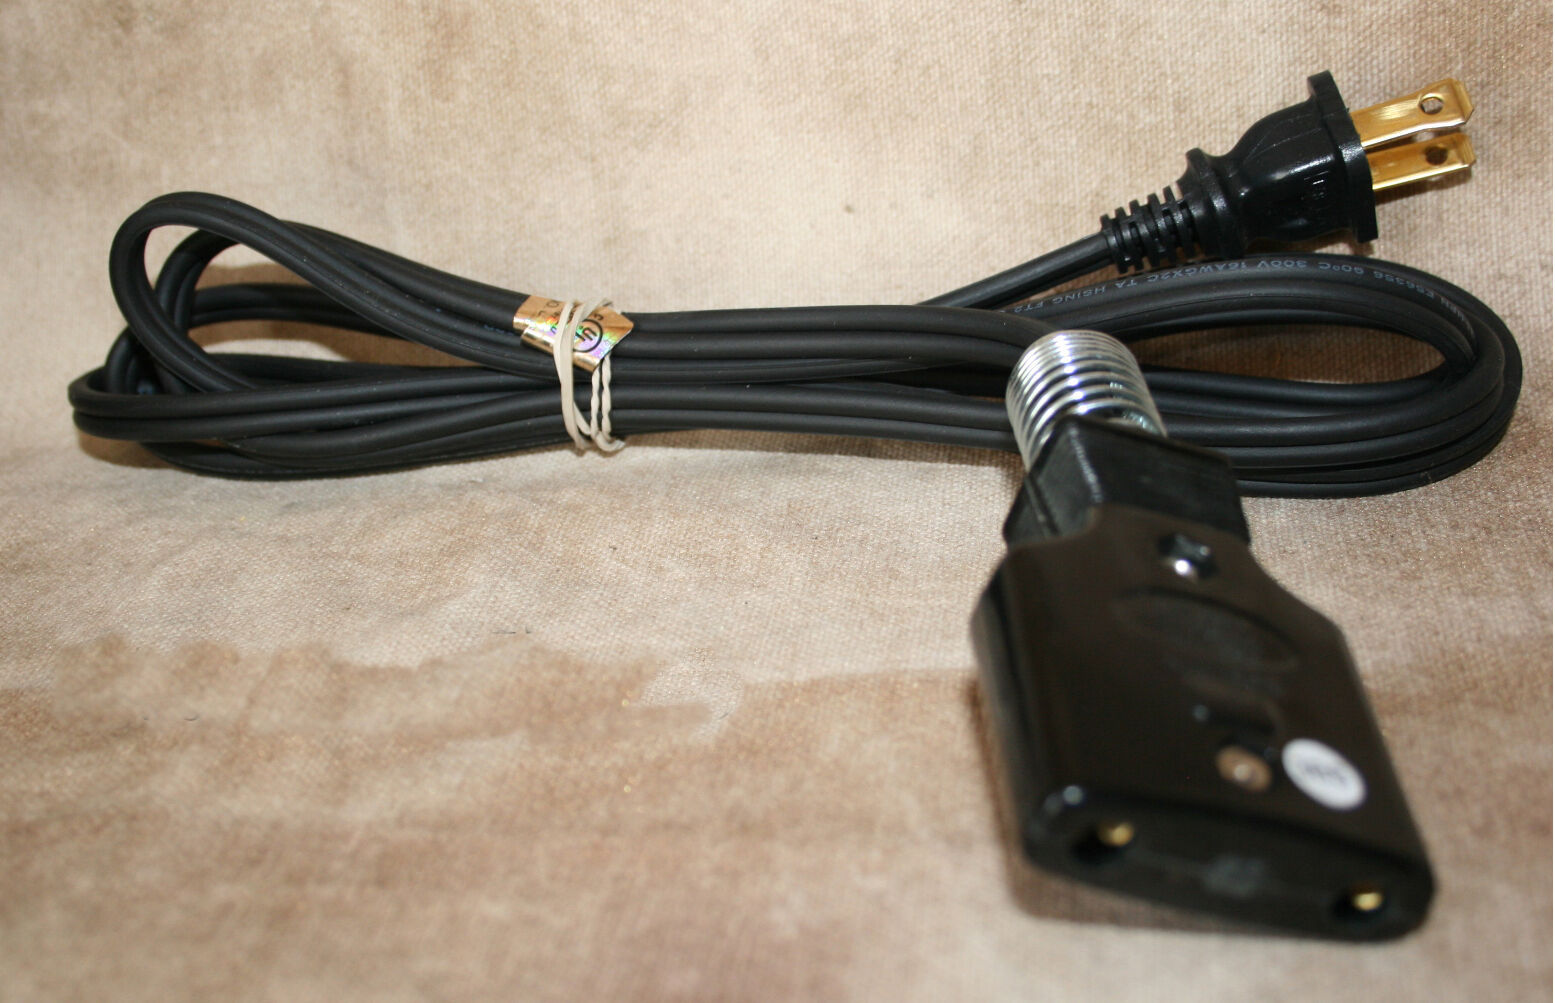 NEW Farberware Rotisserie Broiler Grill CORD After Market Replacement